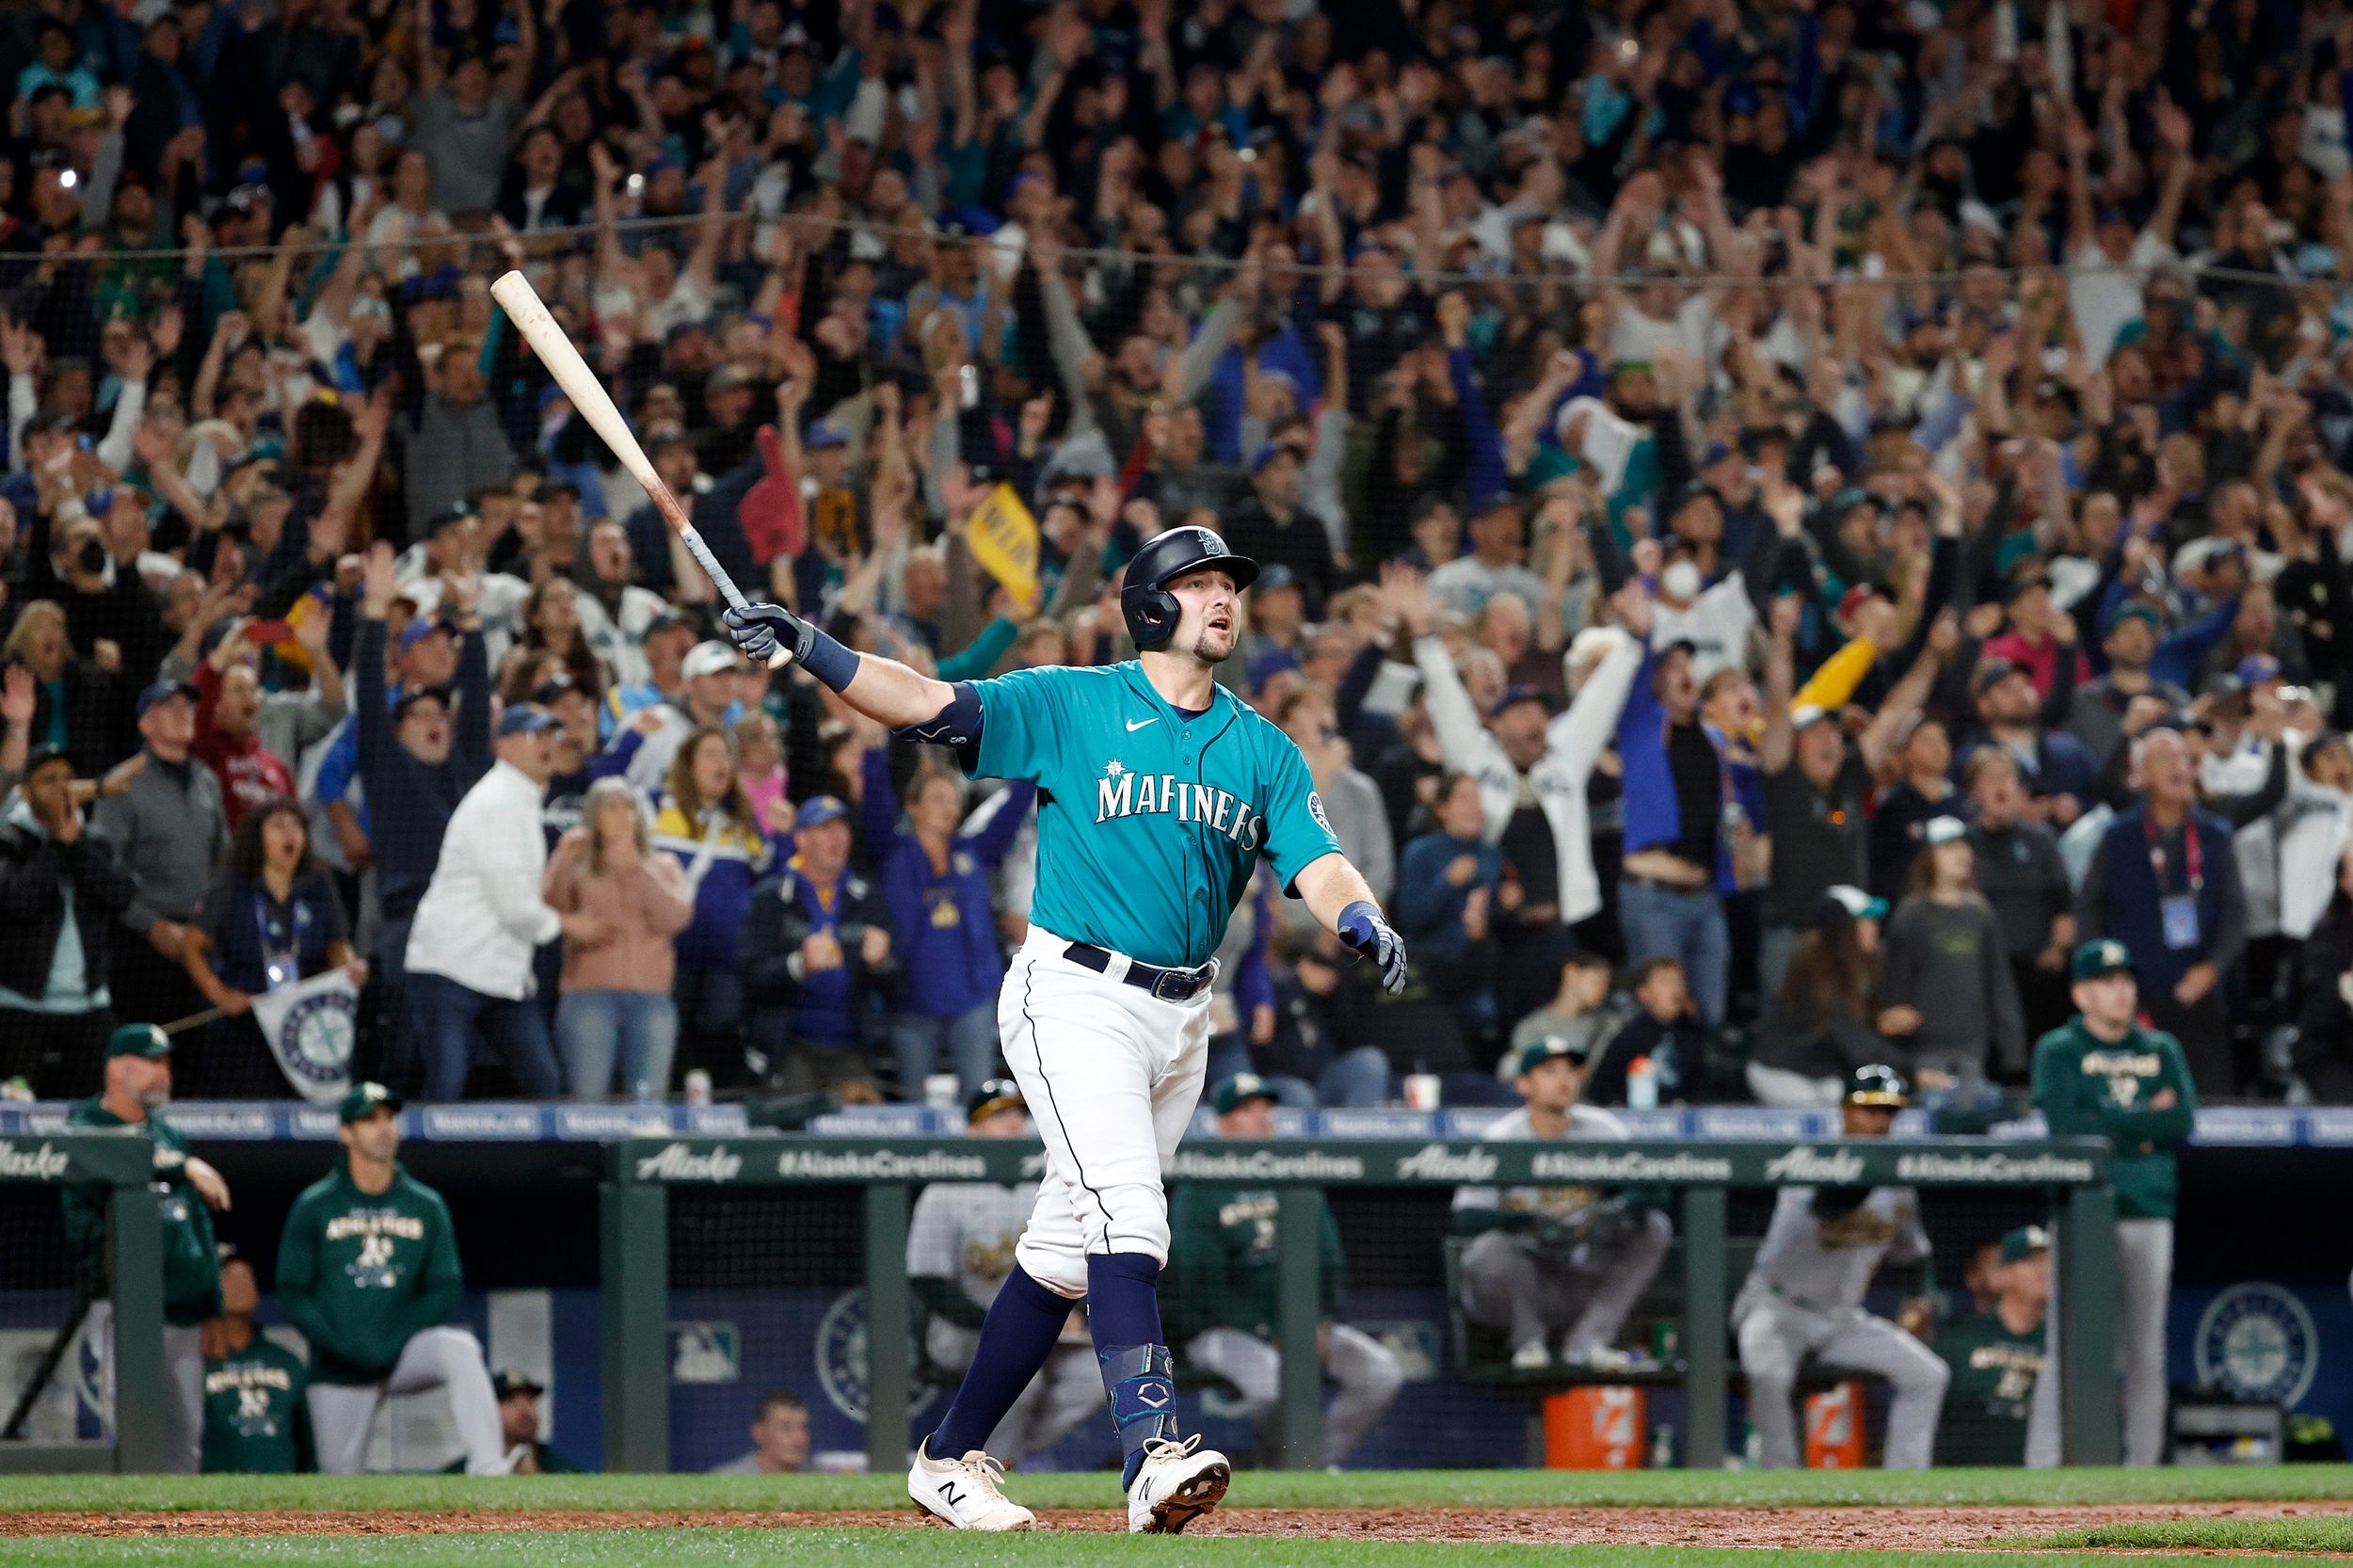 Here is Mariners' magic number to clinch first postseason berth since 2001